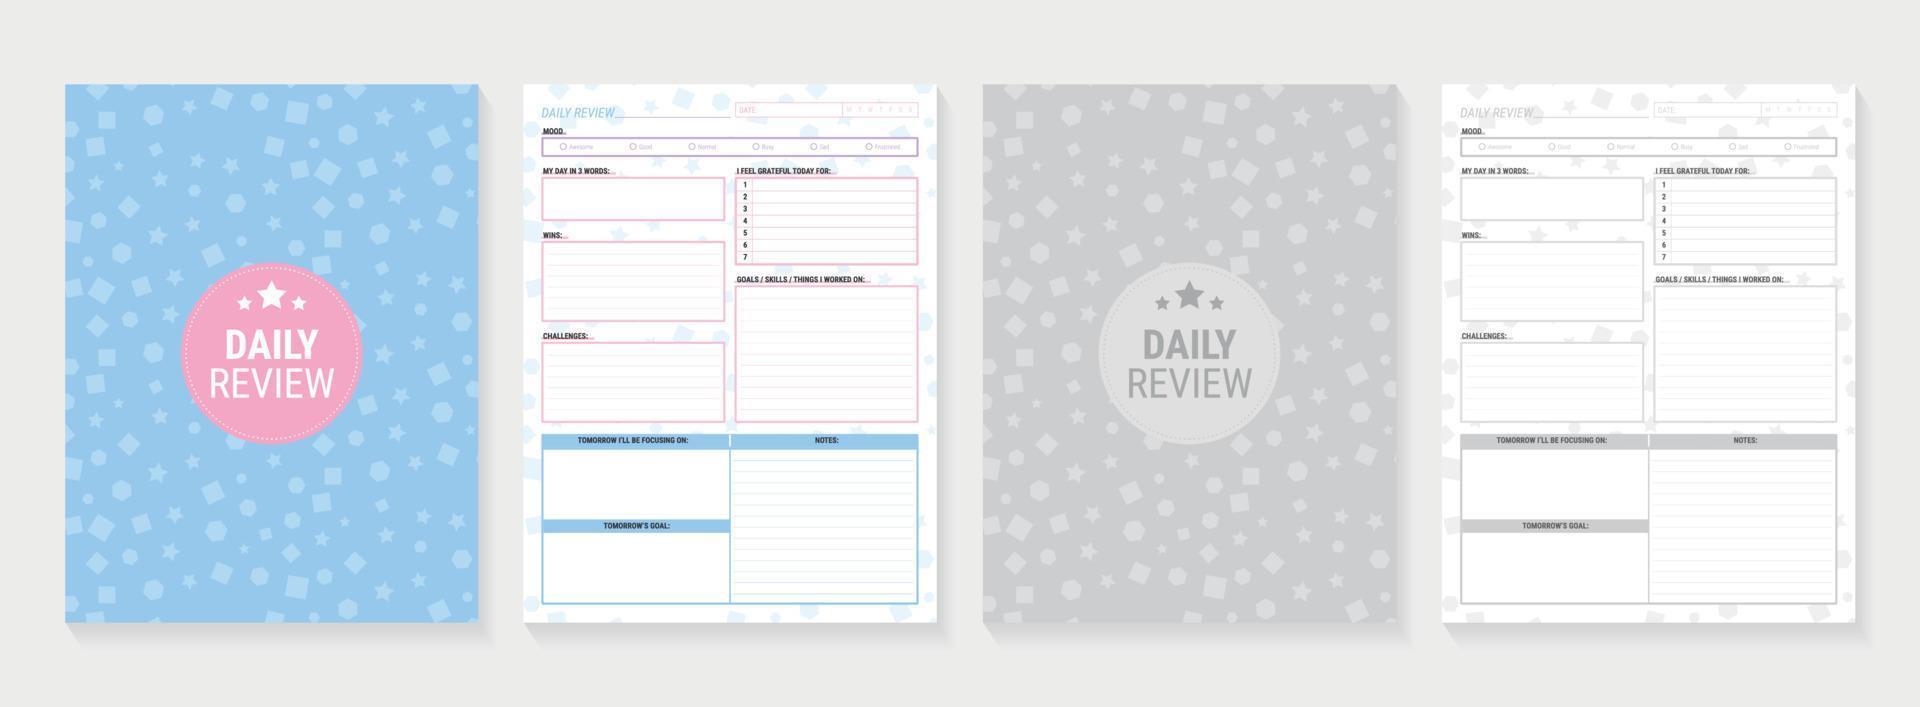 Daily Review Planner Template vector